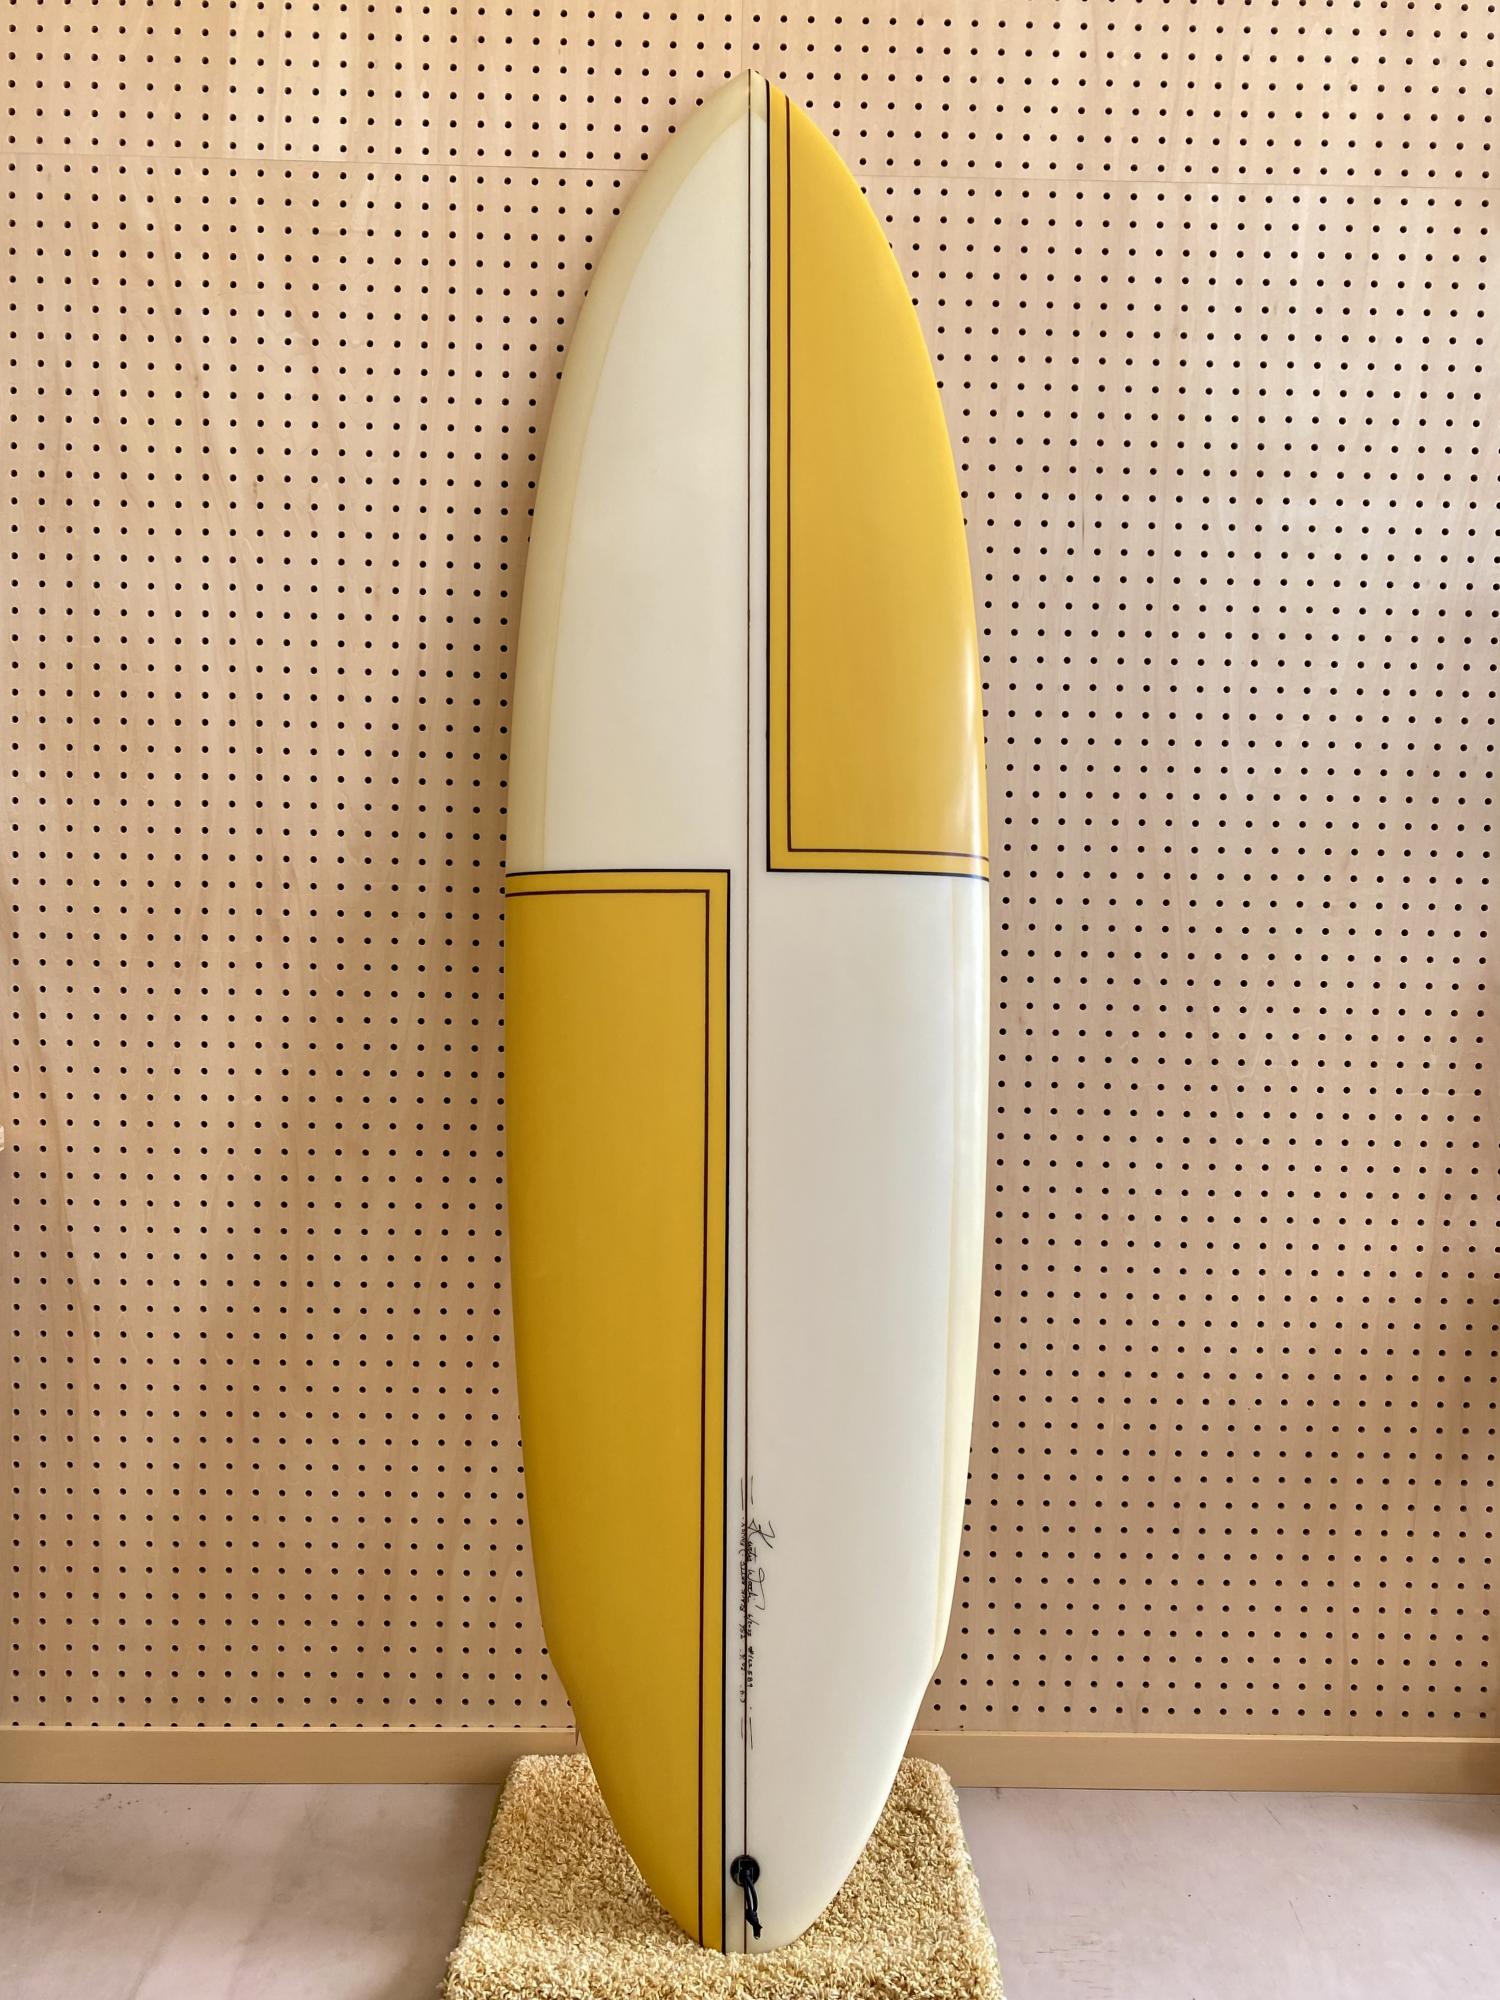 USED (The Black Betty model 6.4 WOODIN SURFBOARDS)